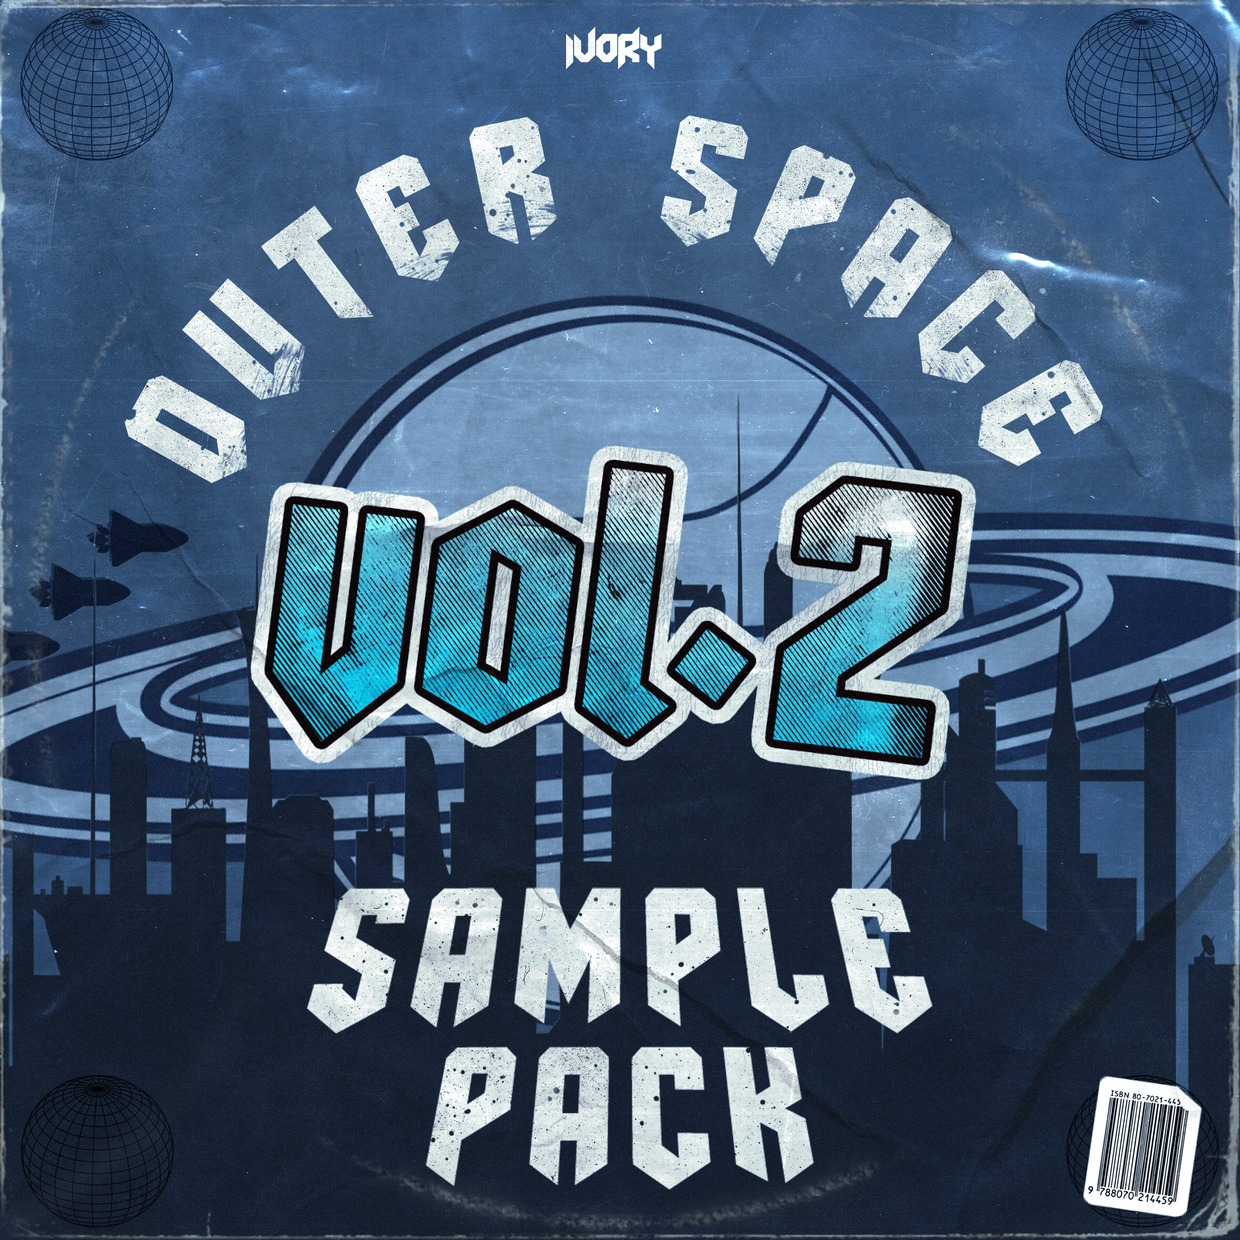 IVORY - Outer Space Vol.2 Sample pack